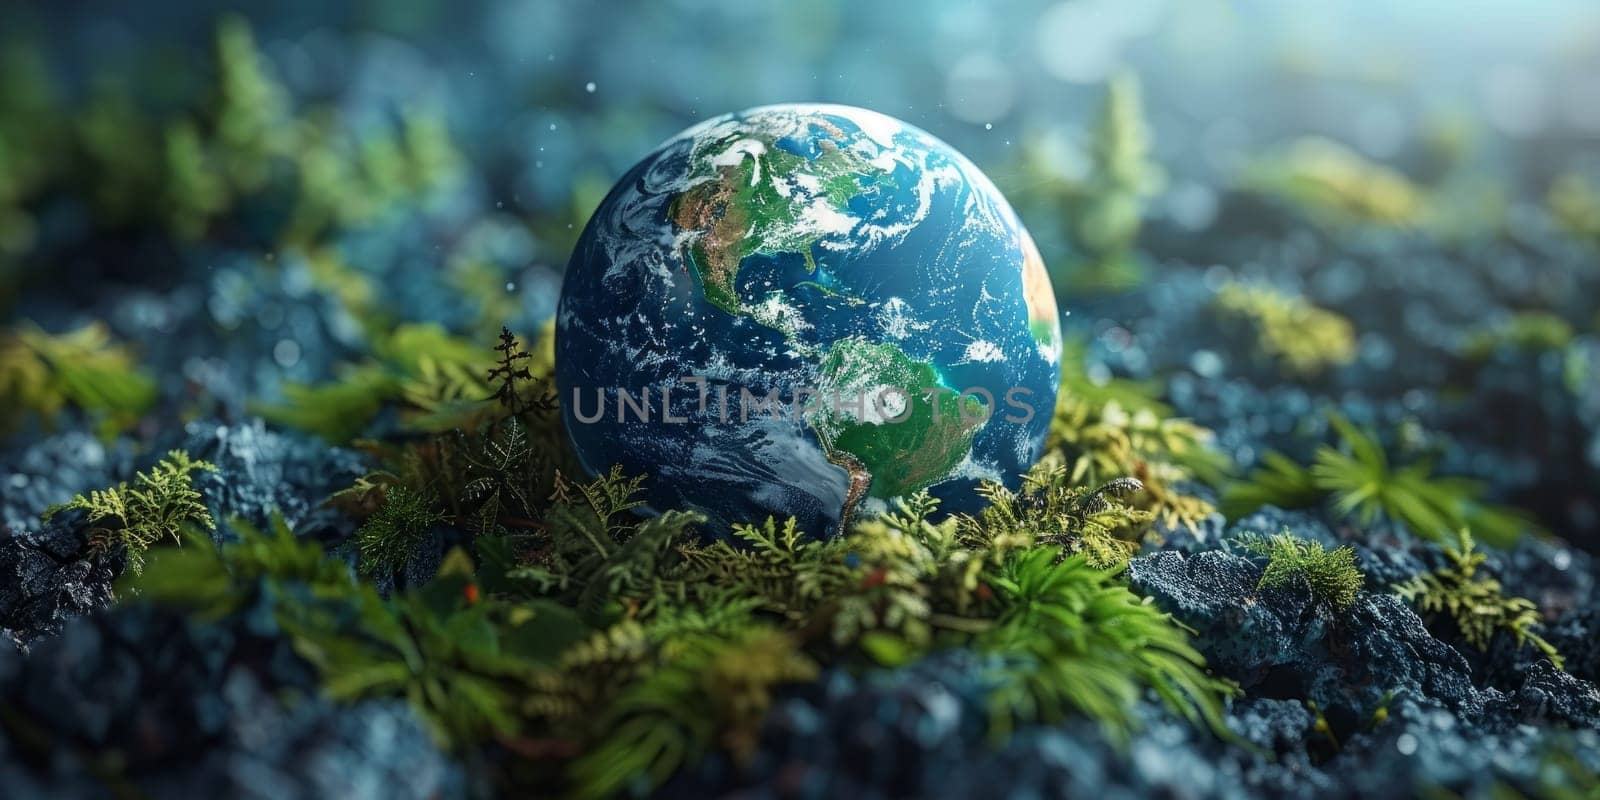 Earth globe on moss in forest, environmental conservation concept. Fragile planet in nature, protecting ecology and sustainable future.